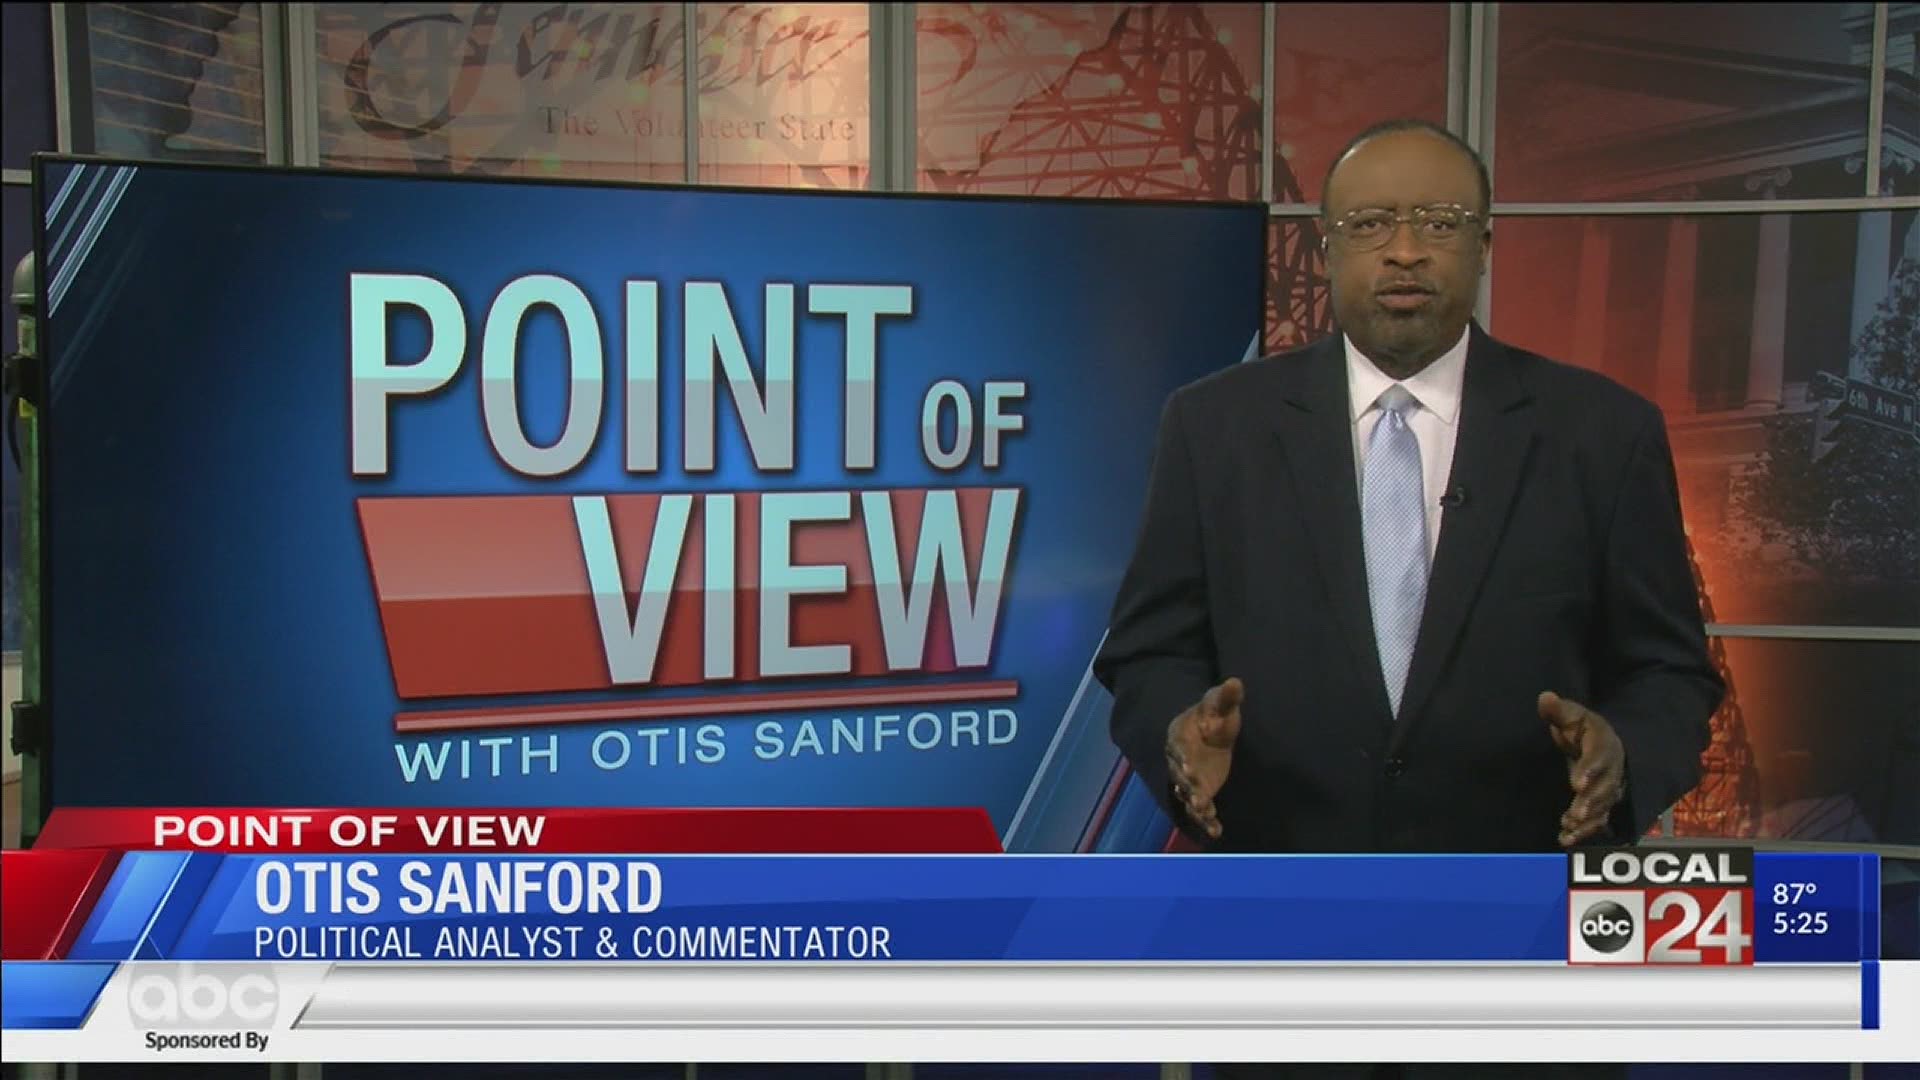 Local 24 News political analyst & commentator Otis Sanford shares his point of view on Lafayette County Board of Supervisors’ decision to keep Confederate monument.